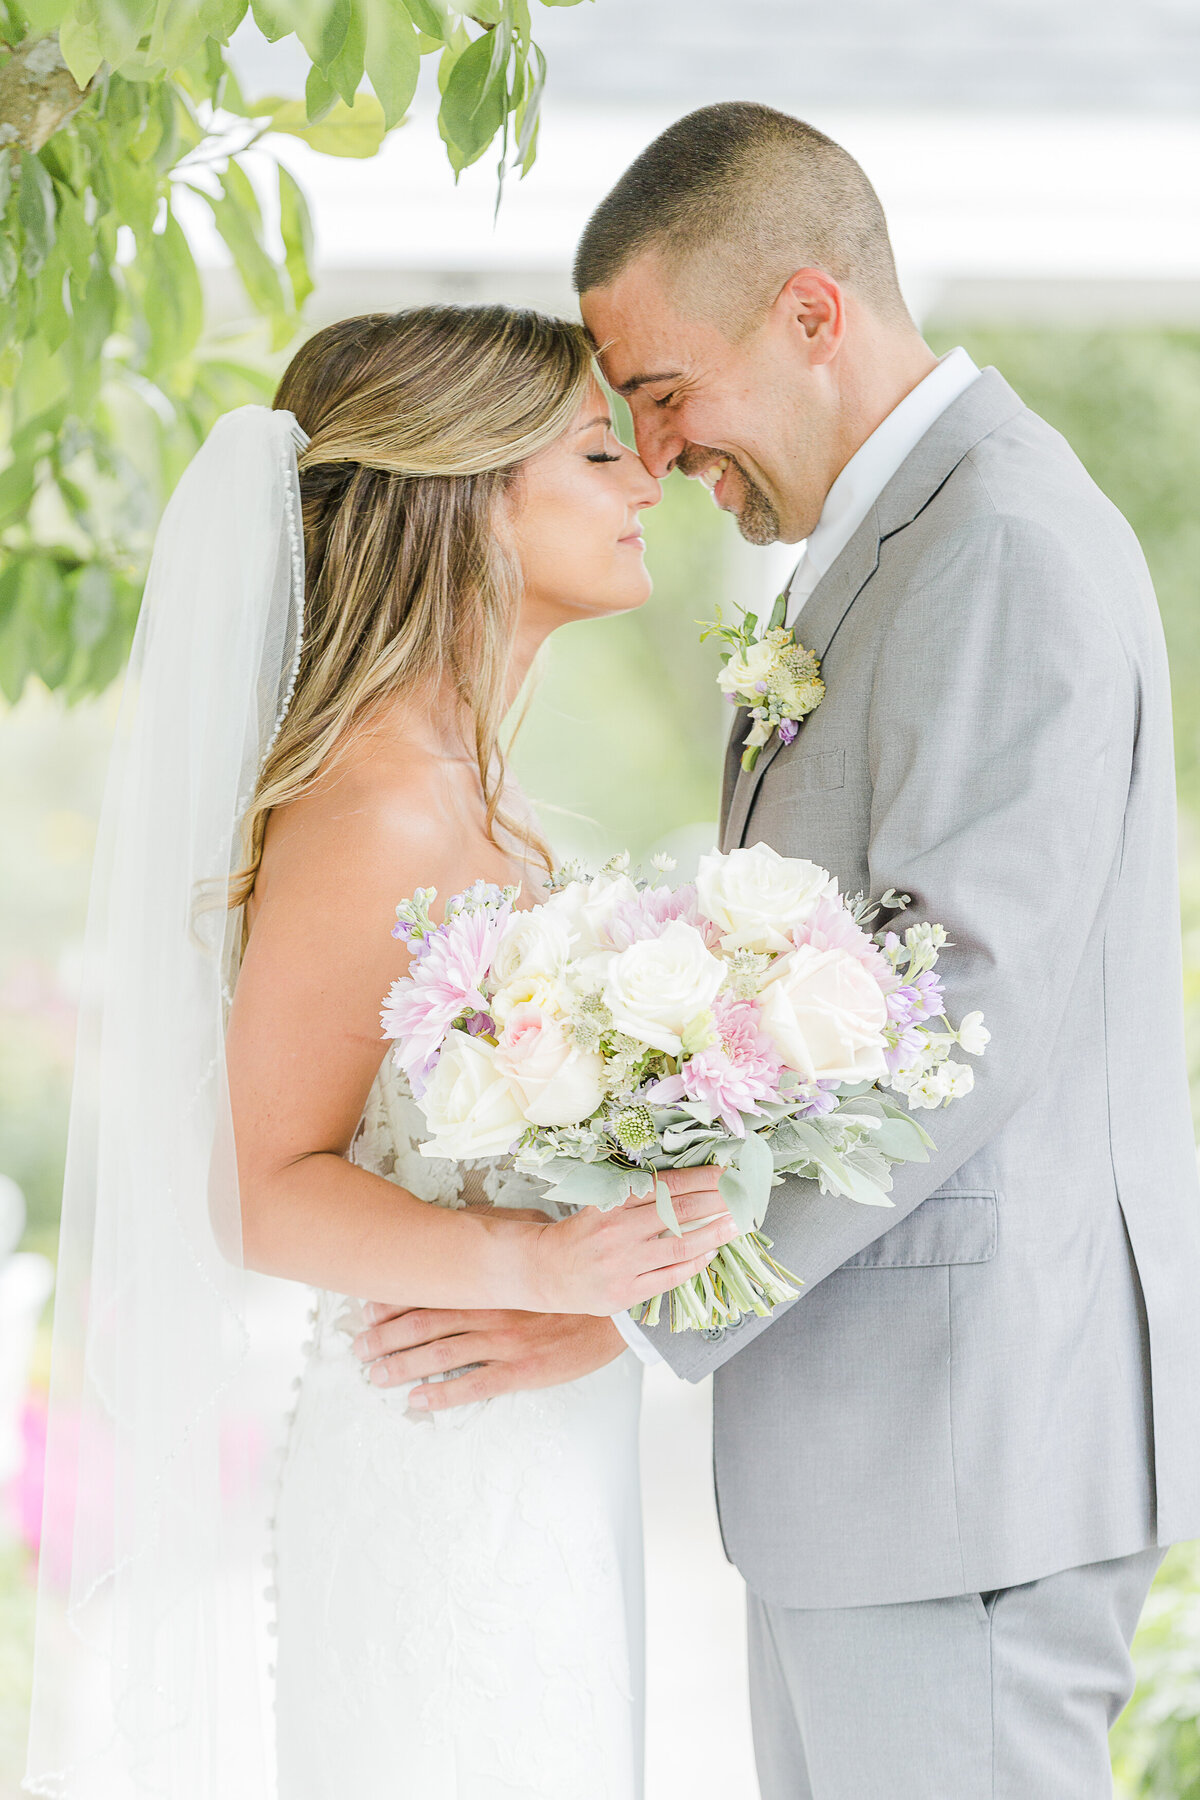 Bride and groom touch noses with their eyes closed for an intimate wedding portrait. The bride is holding her flowers in the foreground. Captured by best Massachusetts wedding photographer Lia Rose Weddings.